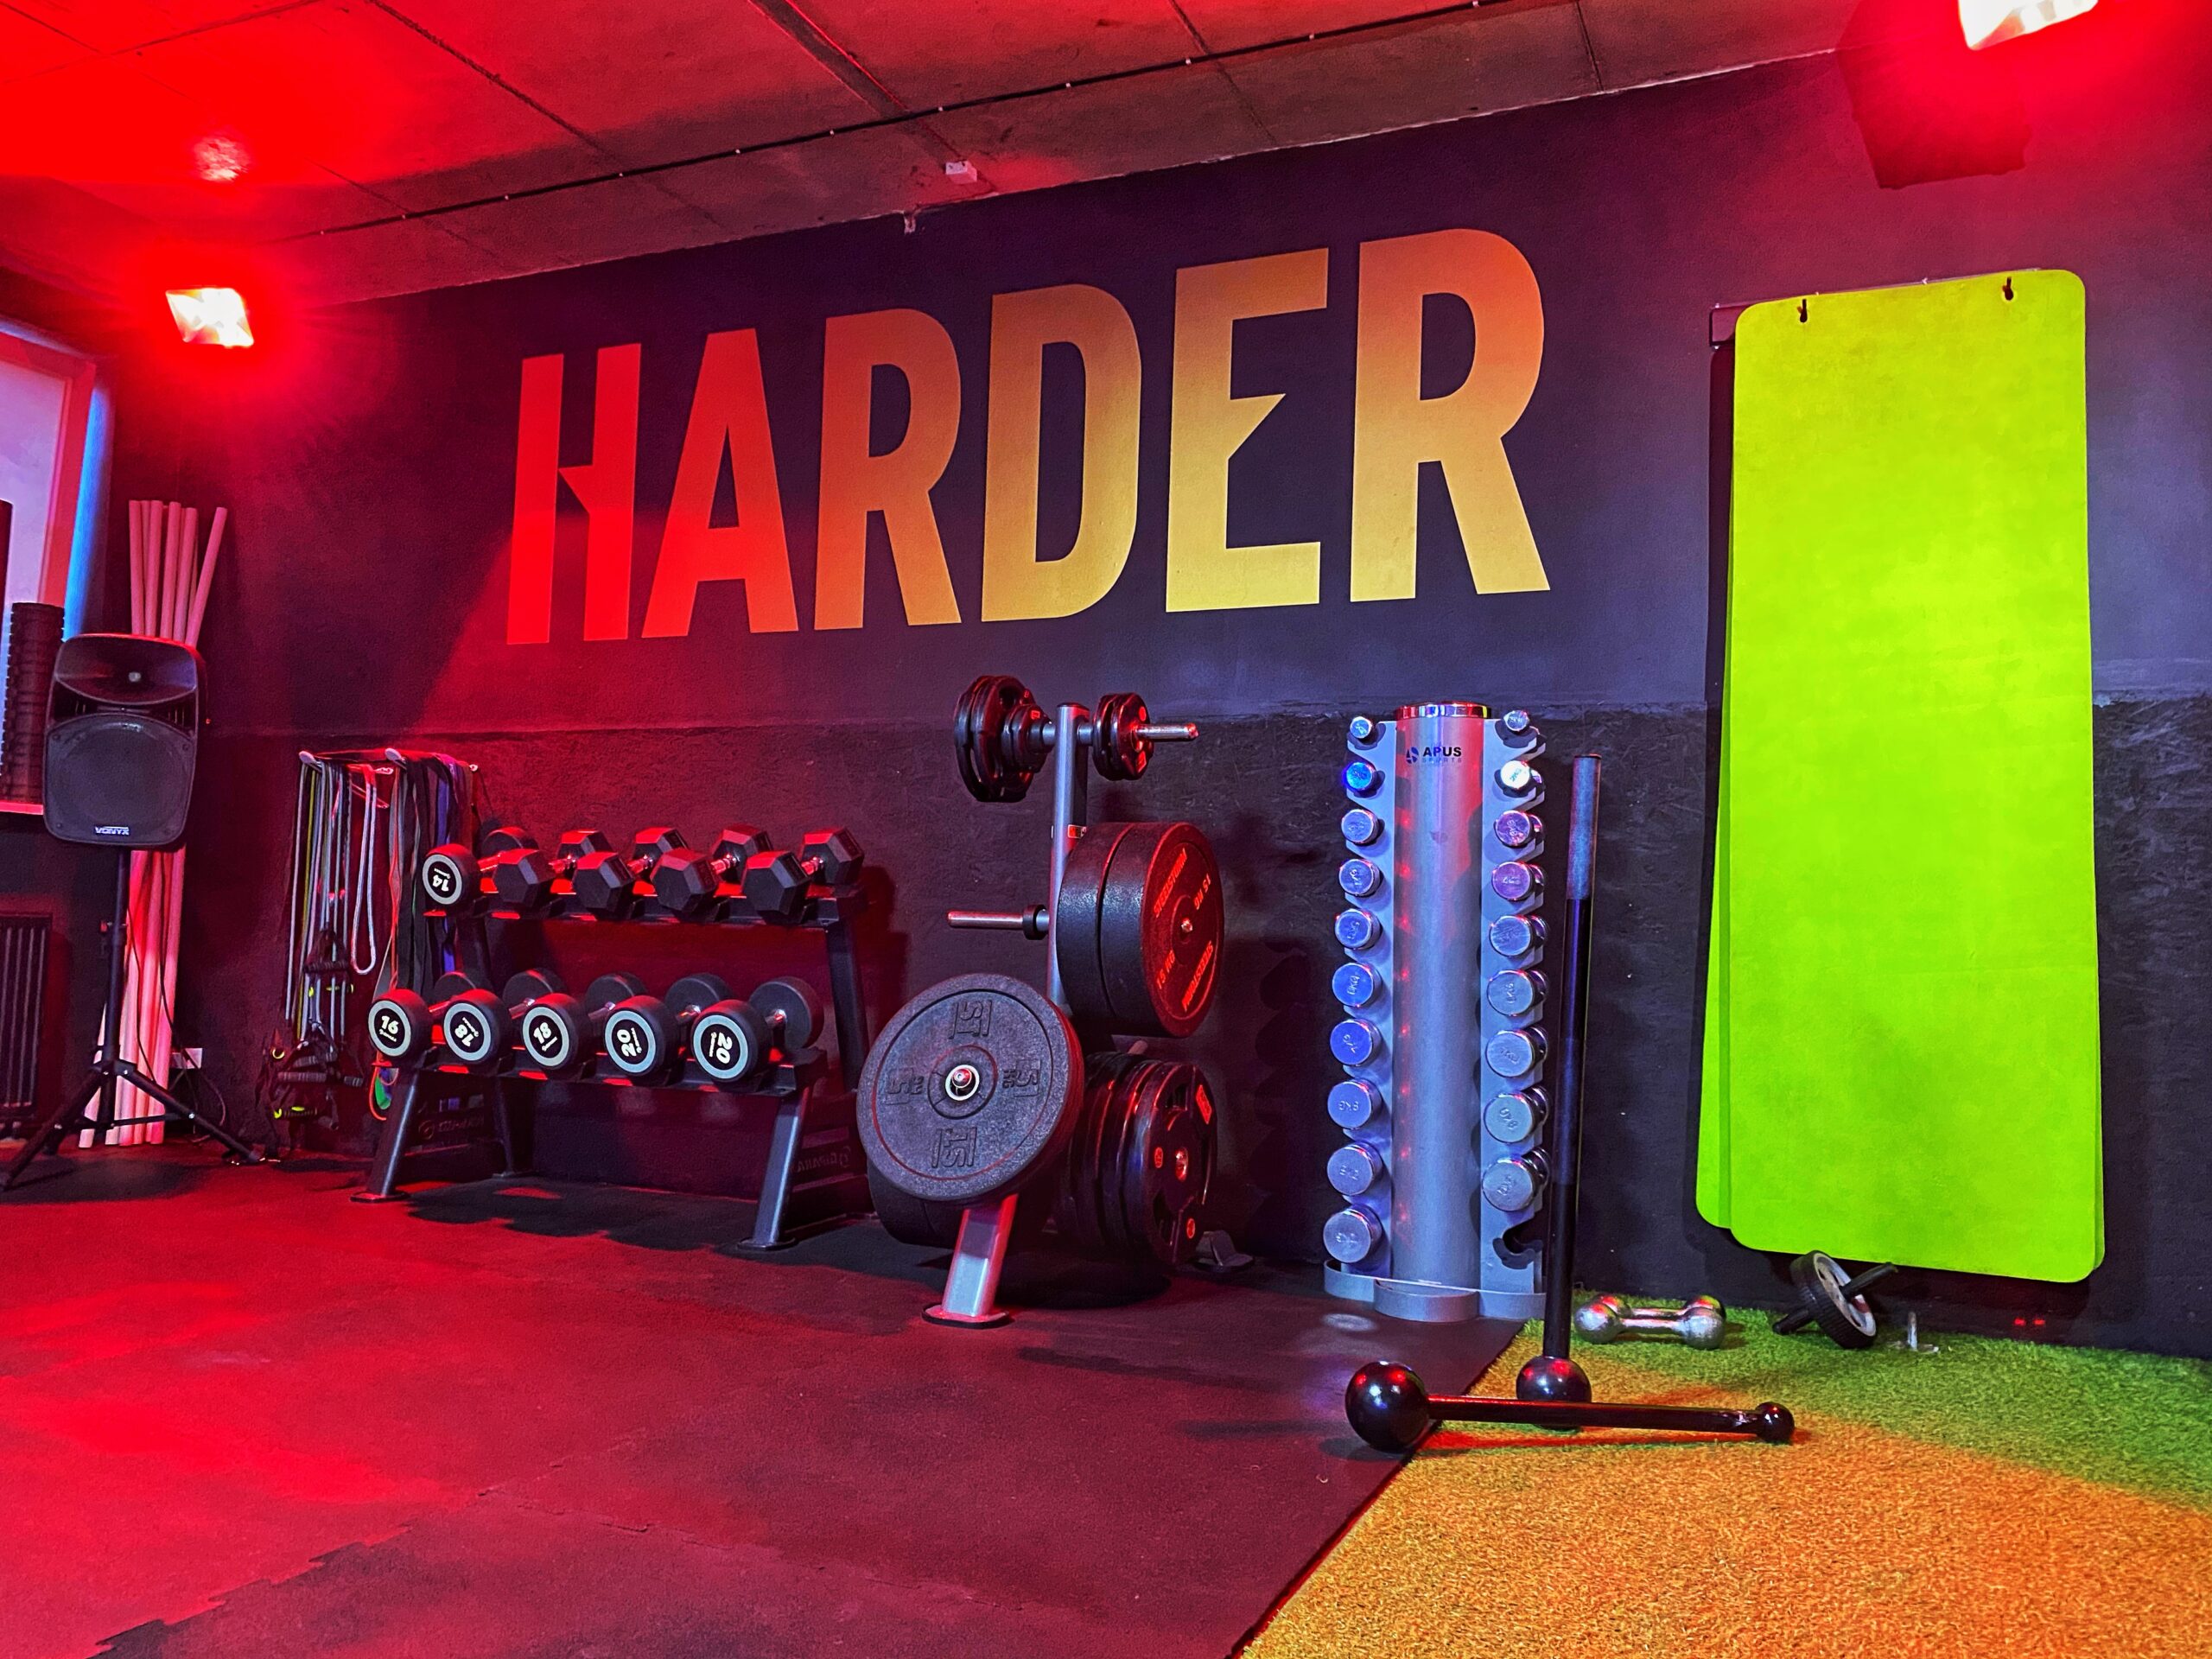 Harder increased class size by 14% with Perfect Gym Mobile App